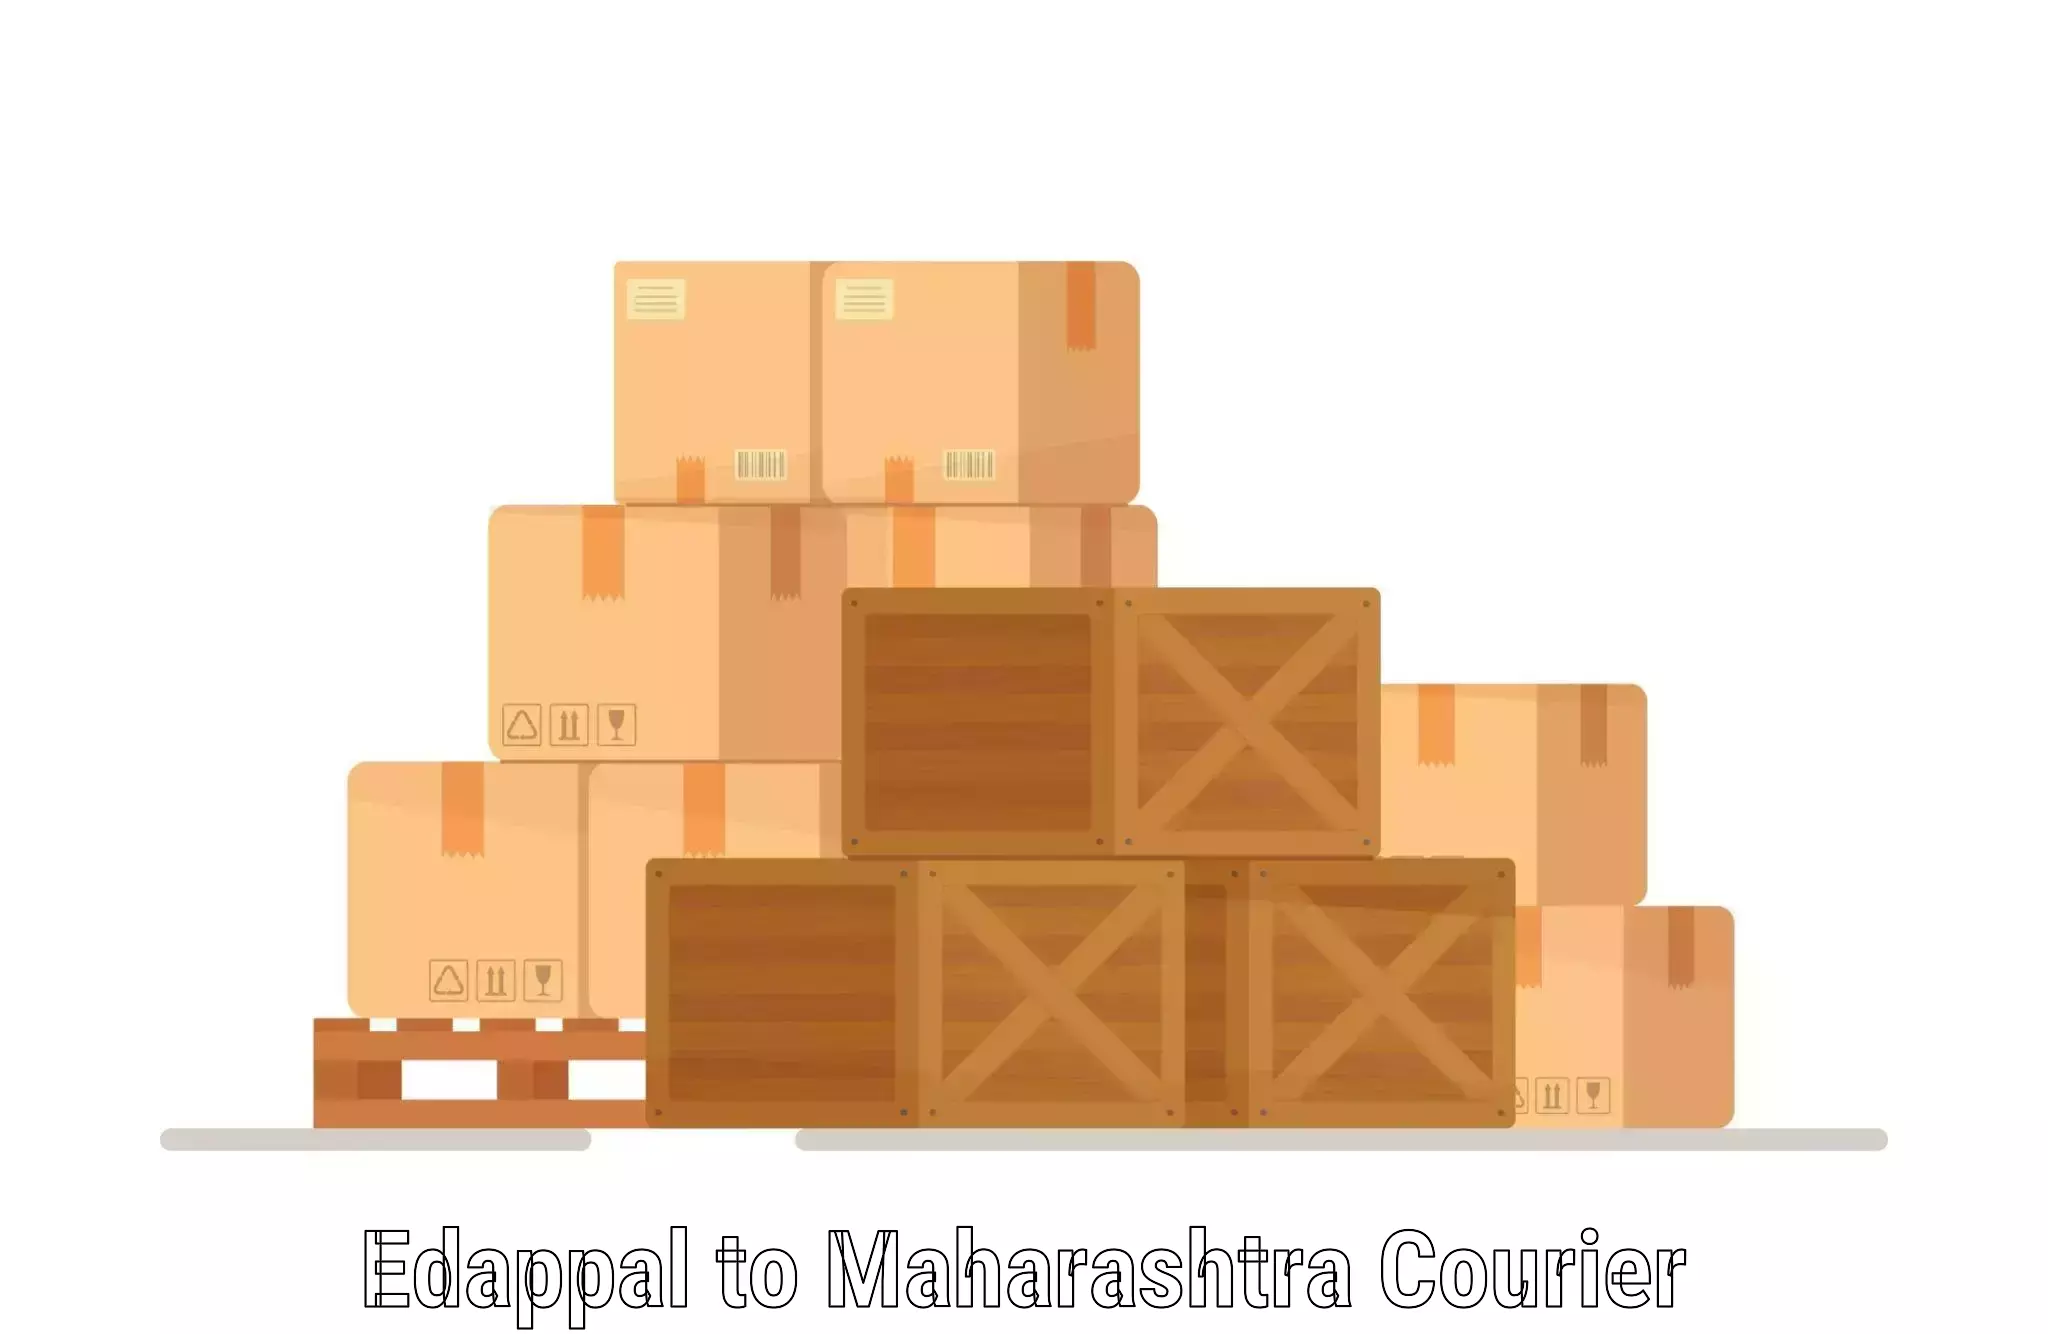 Professional courier handling Edappal to Indapur